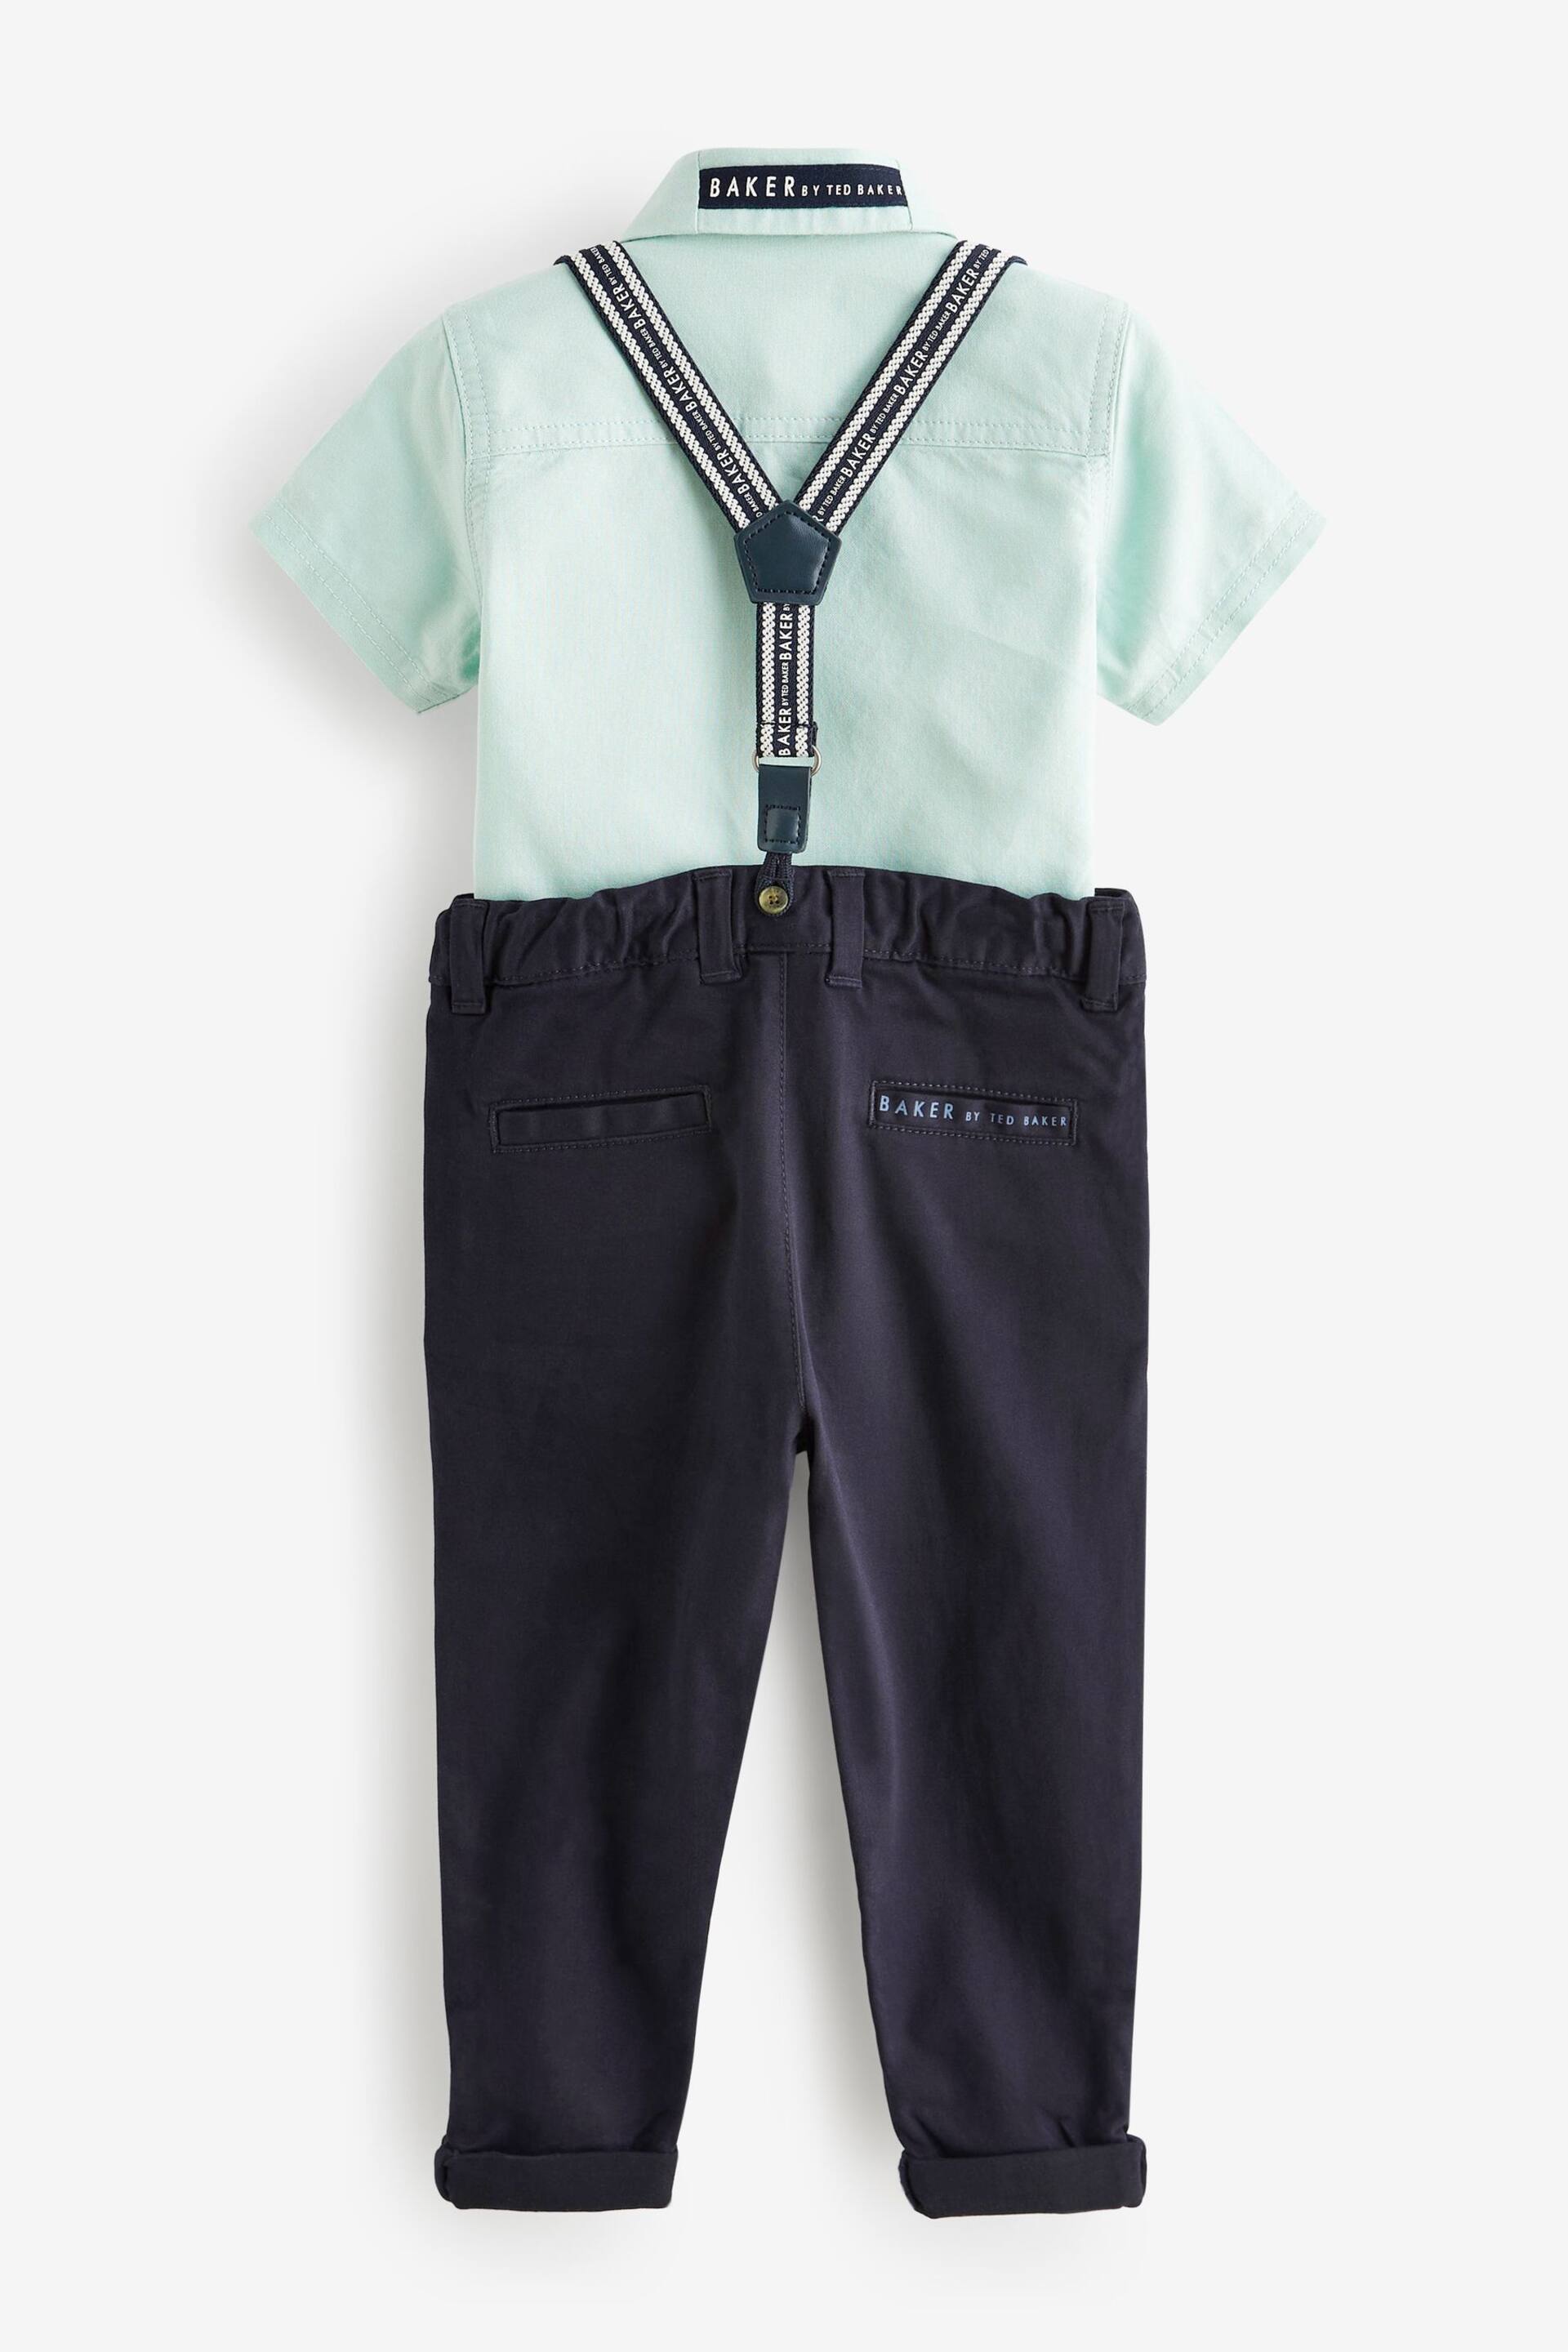 Baker by Ted Baker Shirt and Trousers Set - Image 8 of 11